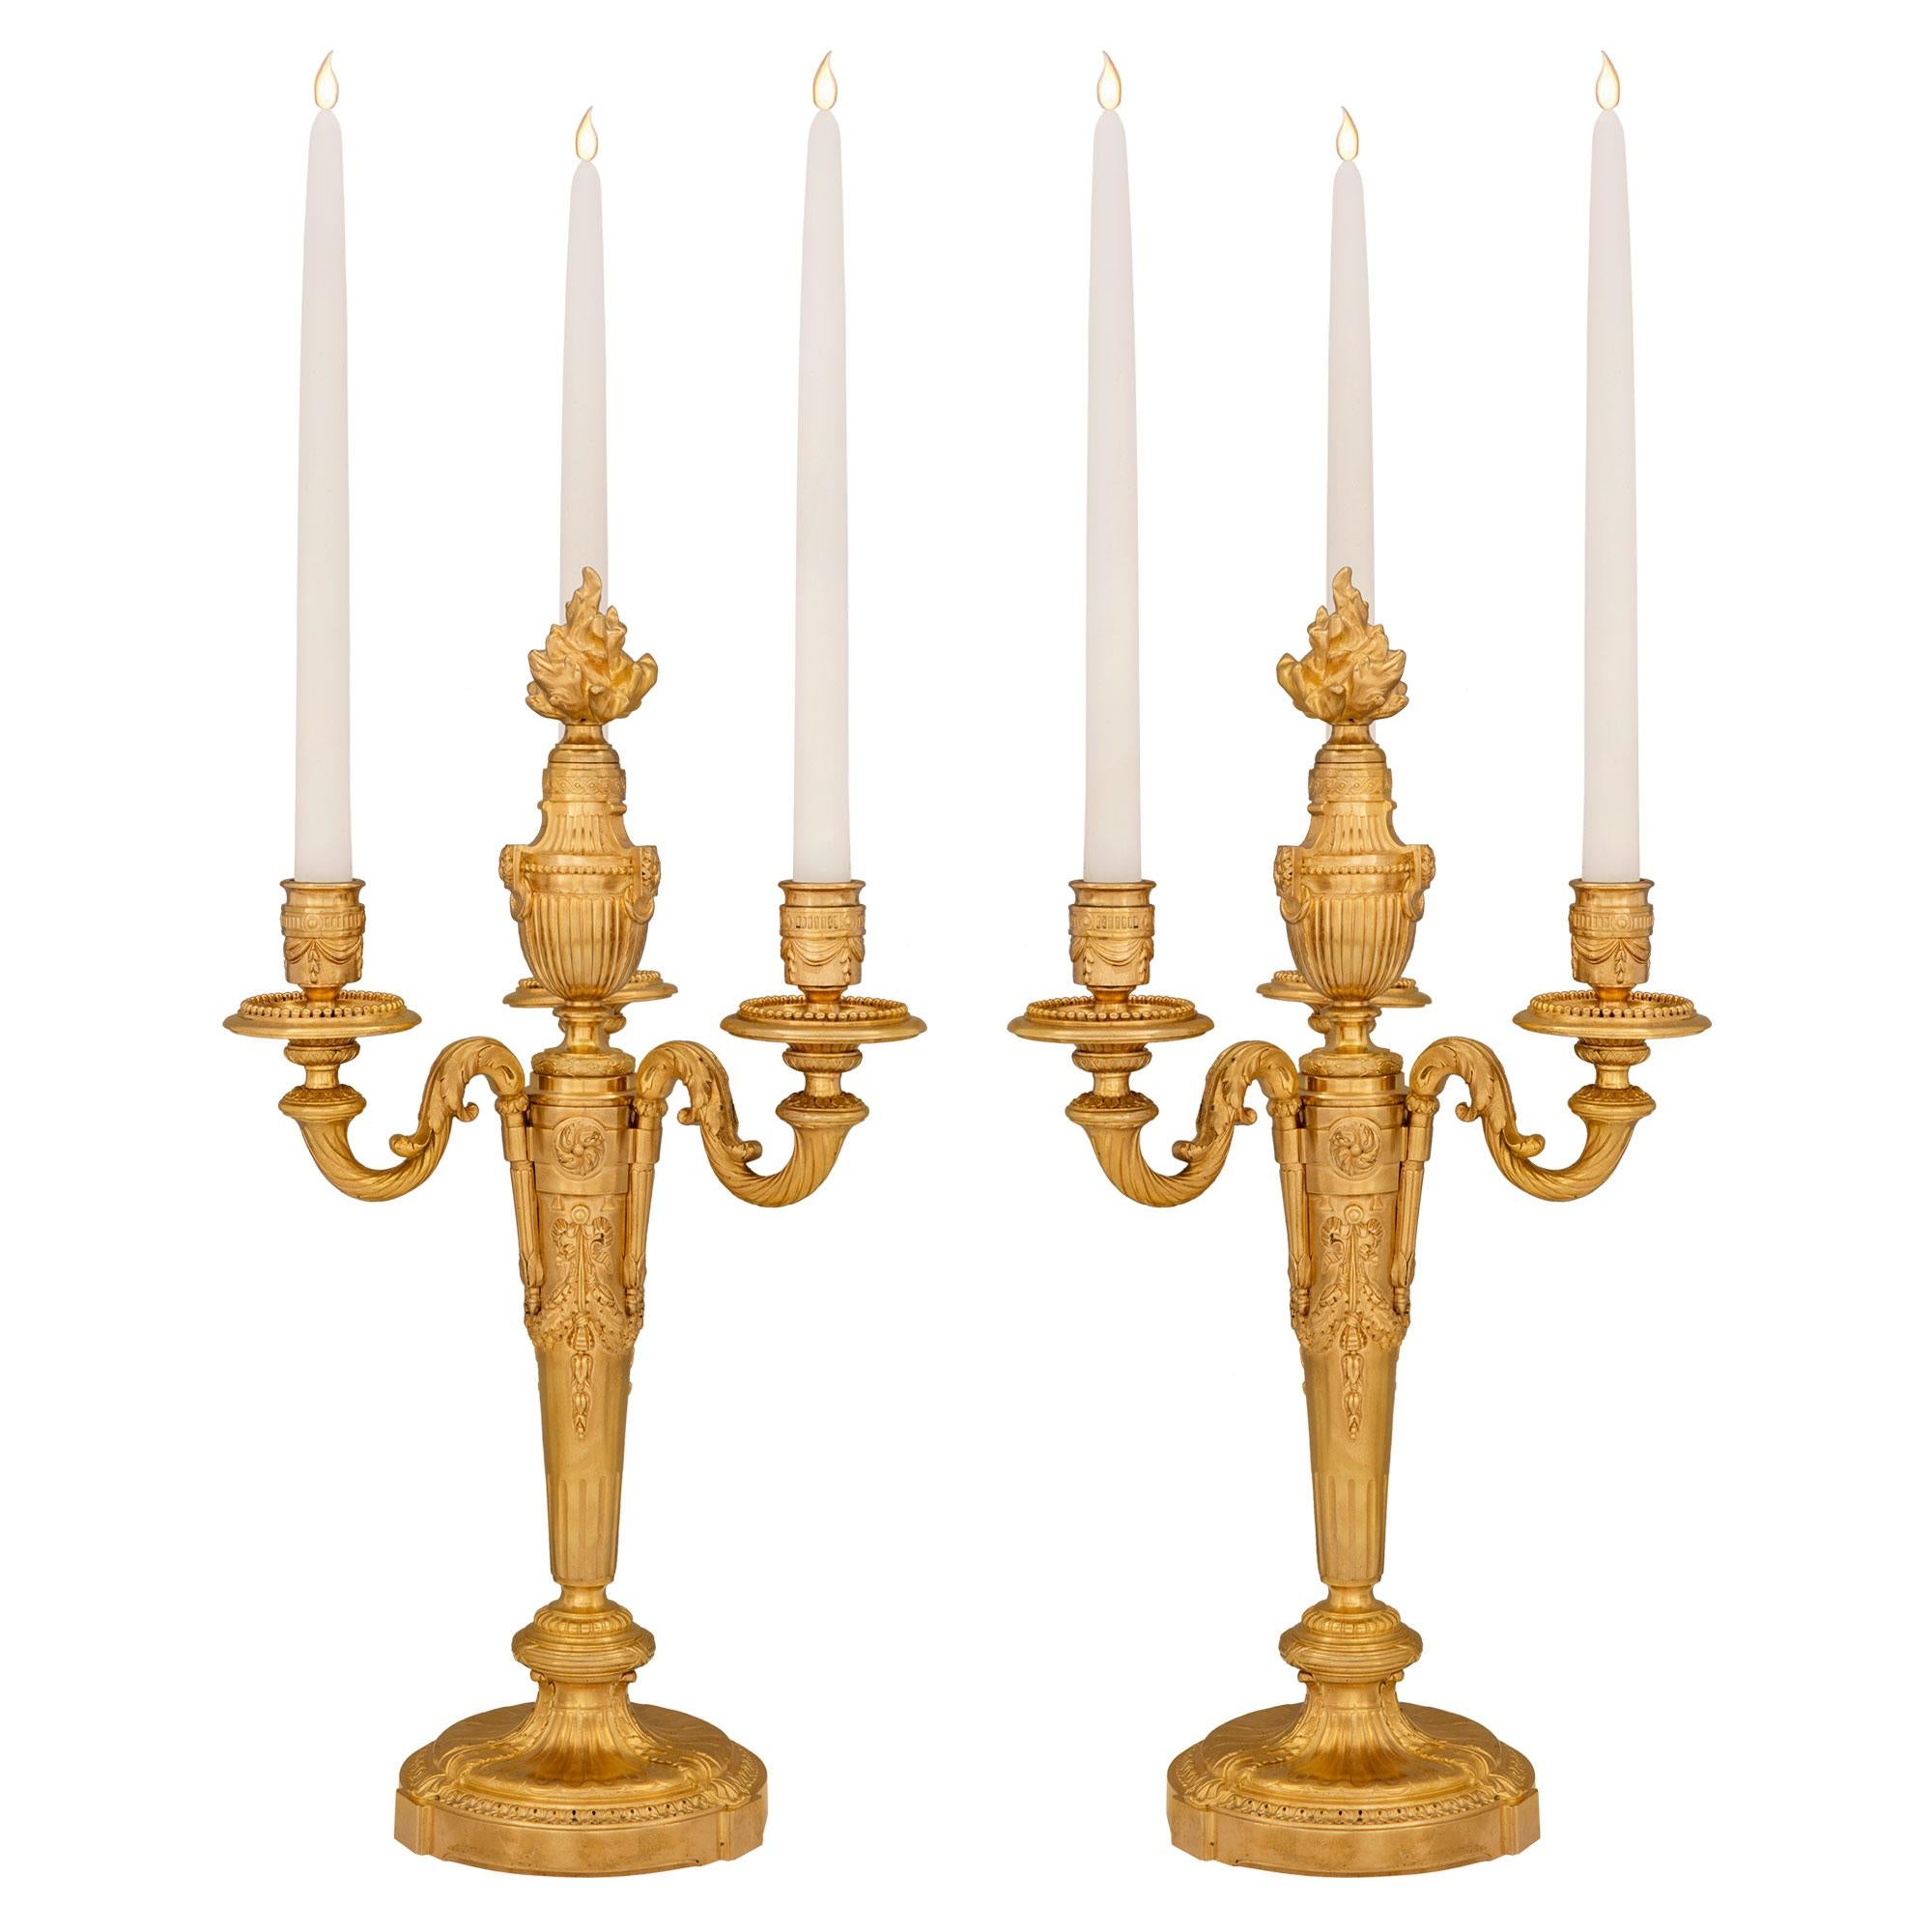 A most elegant pair of French 19th century Louis XVI st. ormolu candelabras. Each three arm candelabra is raised by a Fine circular base with a detailed Coeur de Rai wrap around band and acanthus leaves. The tapered central supports display richly